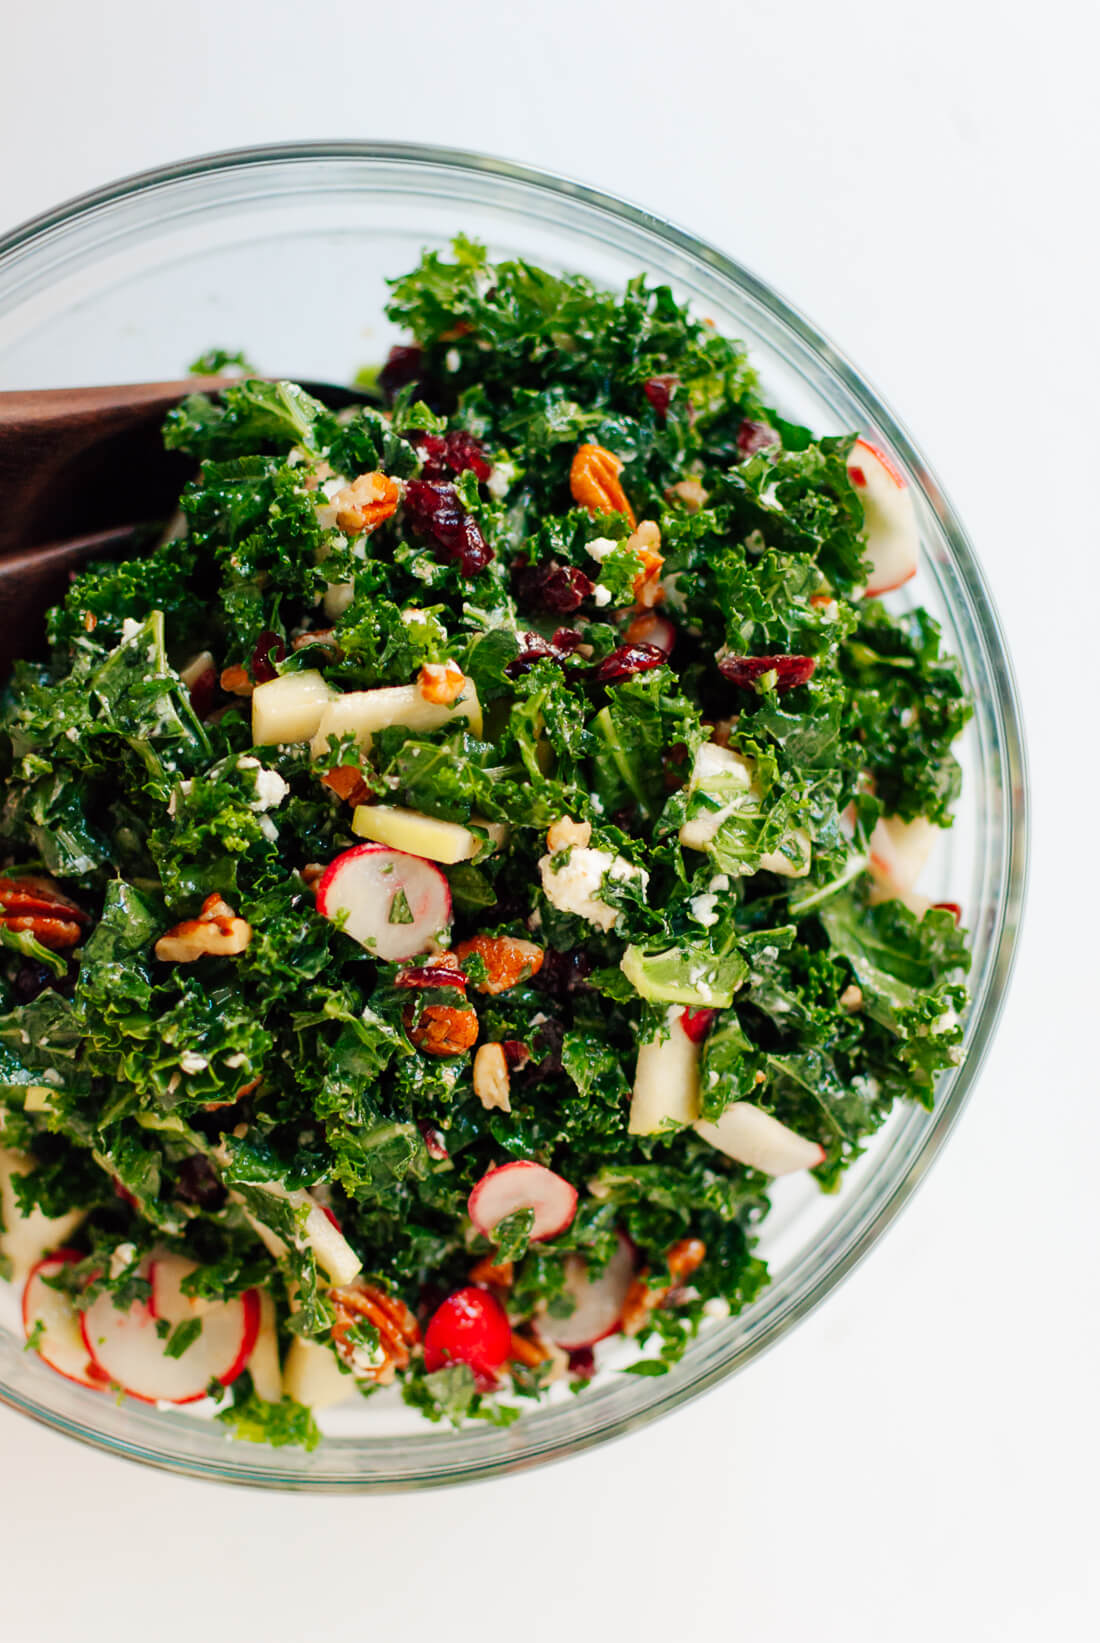 Kale Salad with Apple, Cranberries and Pecans